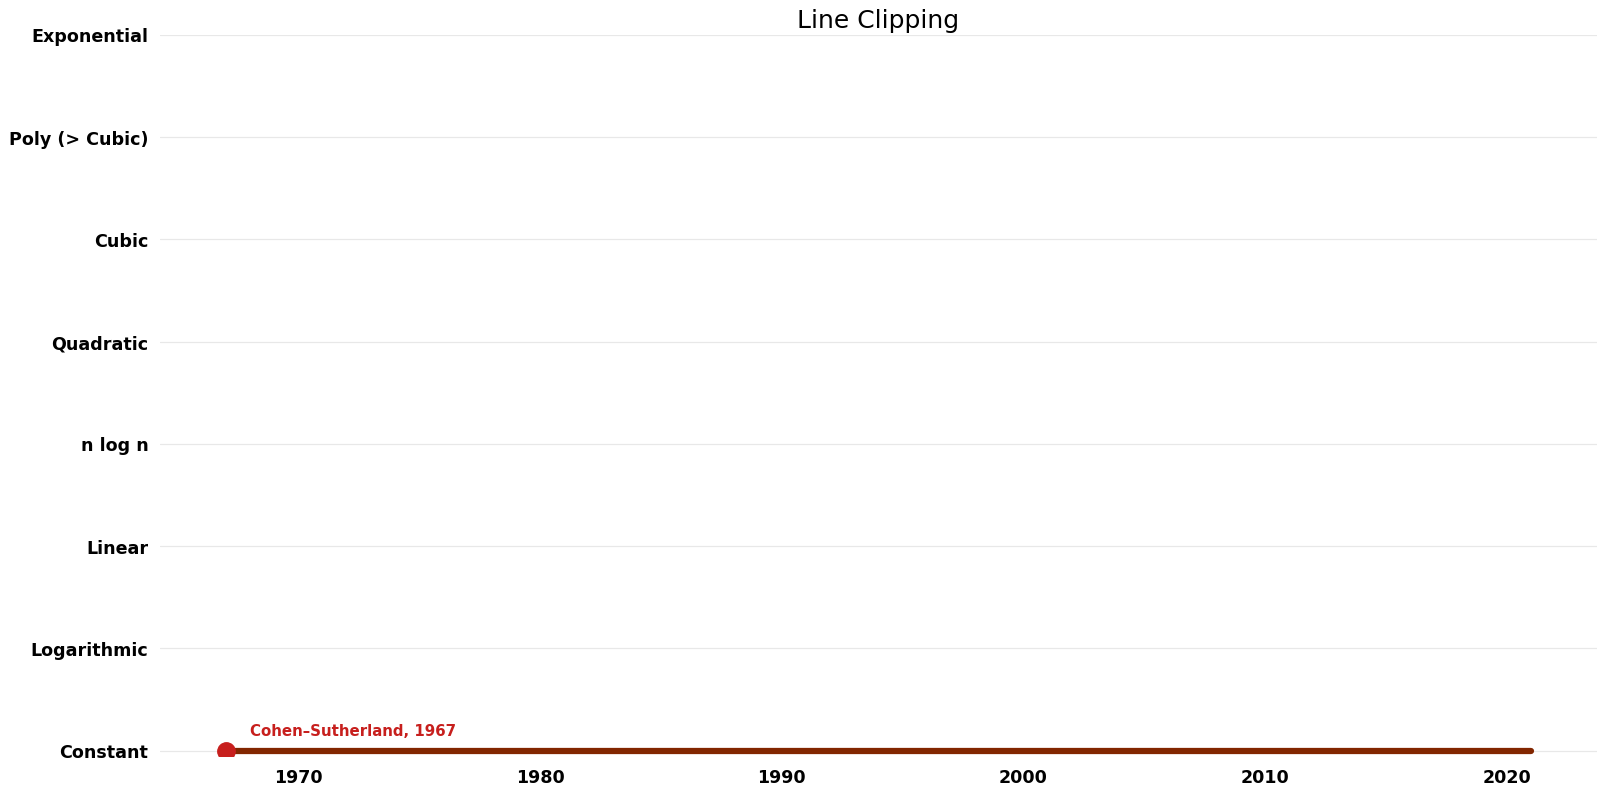 File:Line Clipping - Space.png